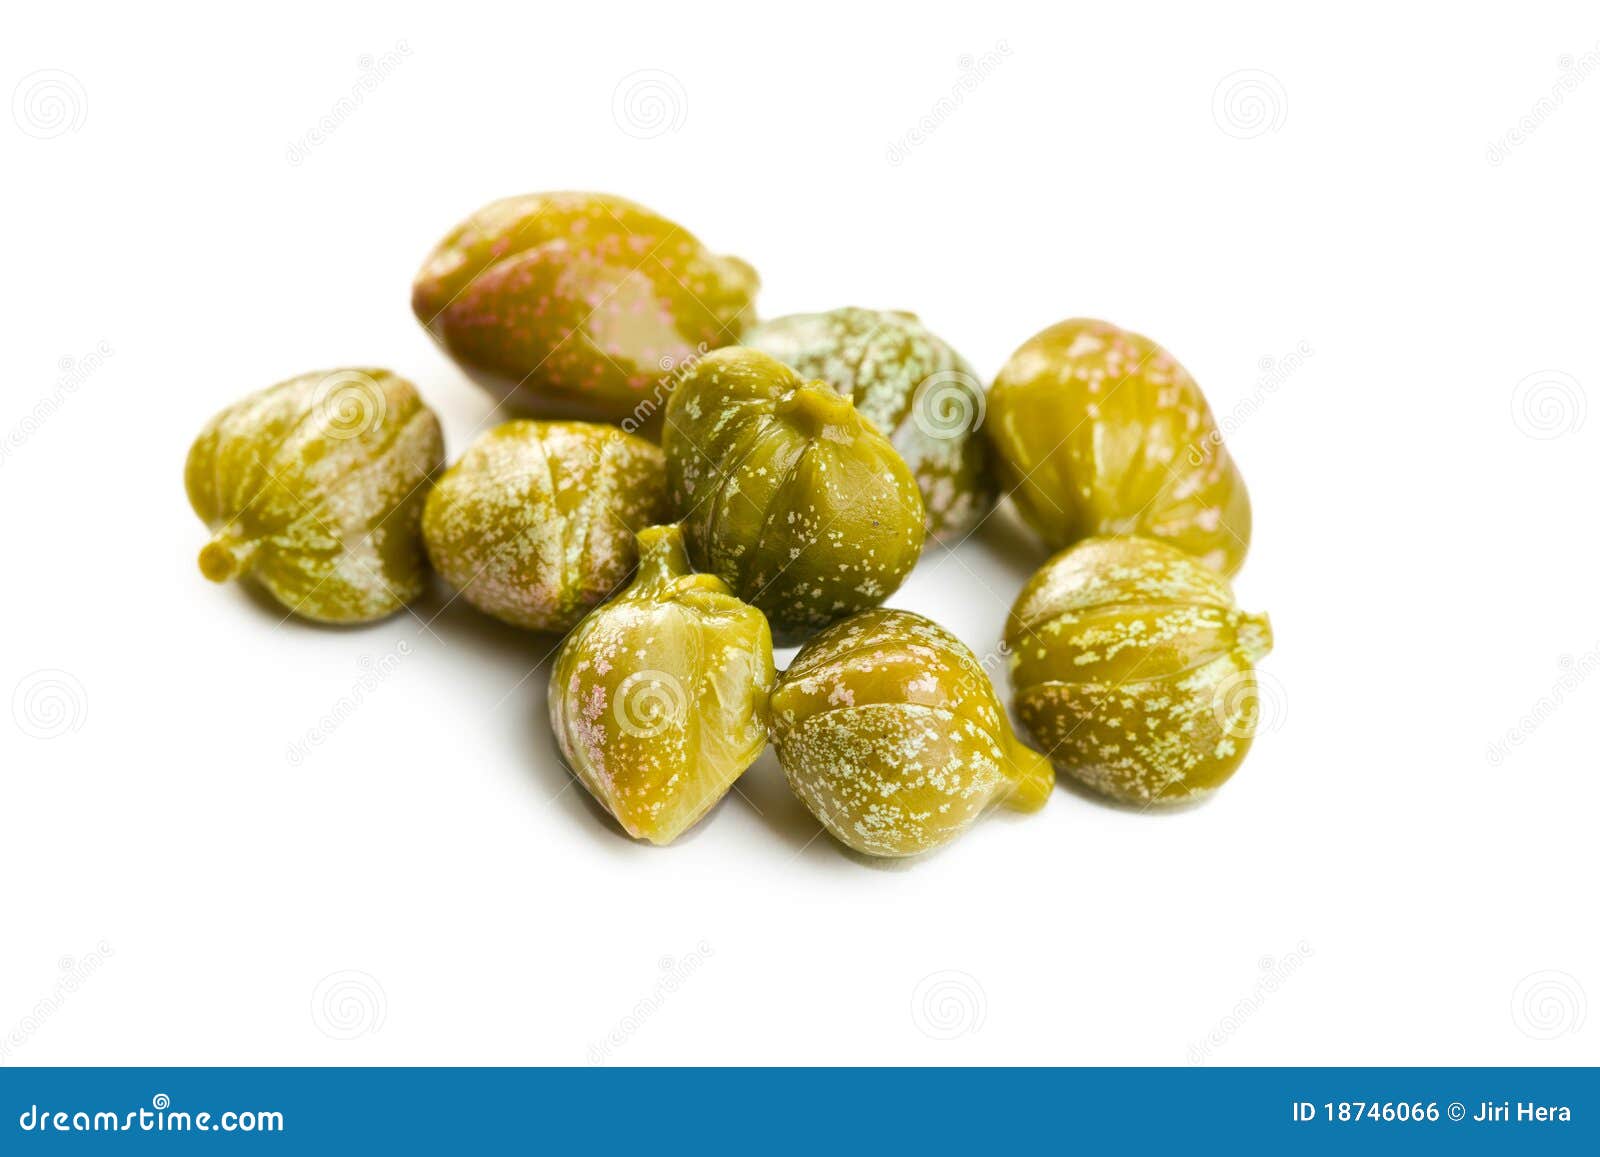 Green capers stock photo. Image of preserved, antipasti - 18746066